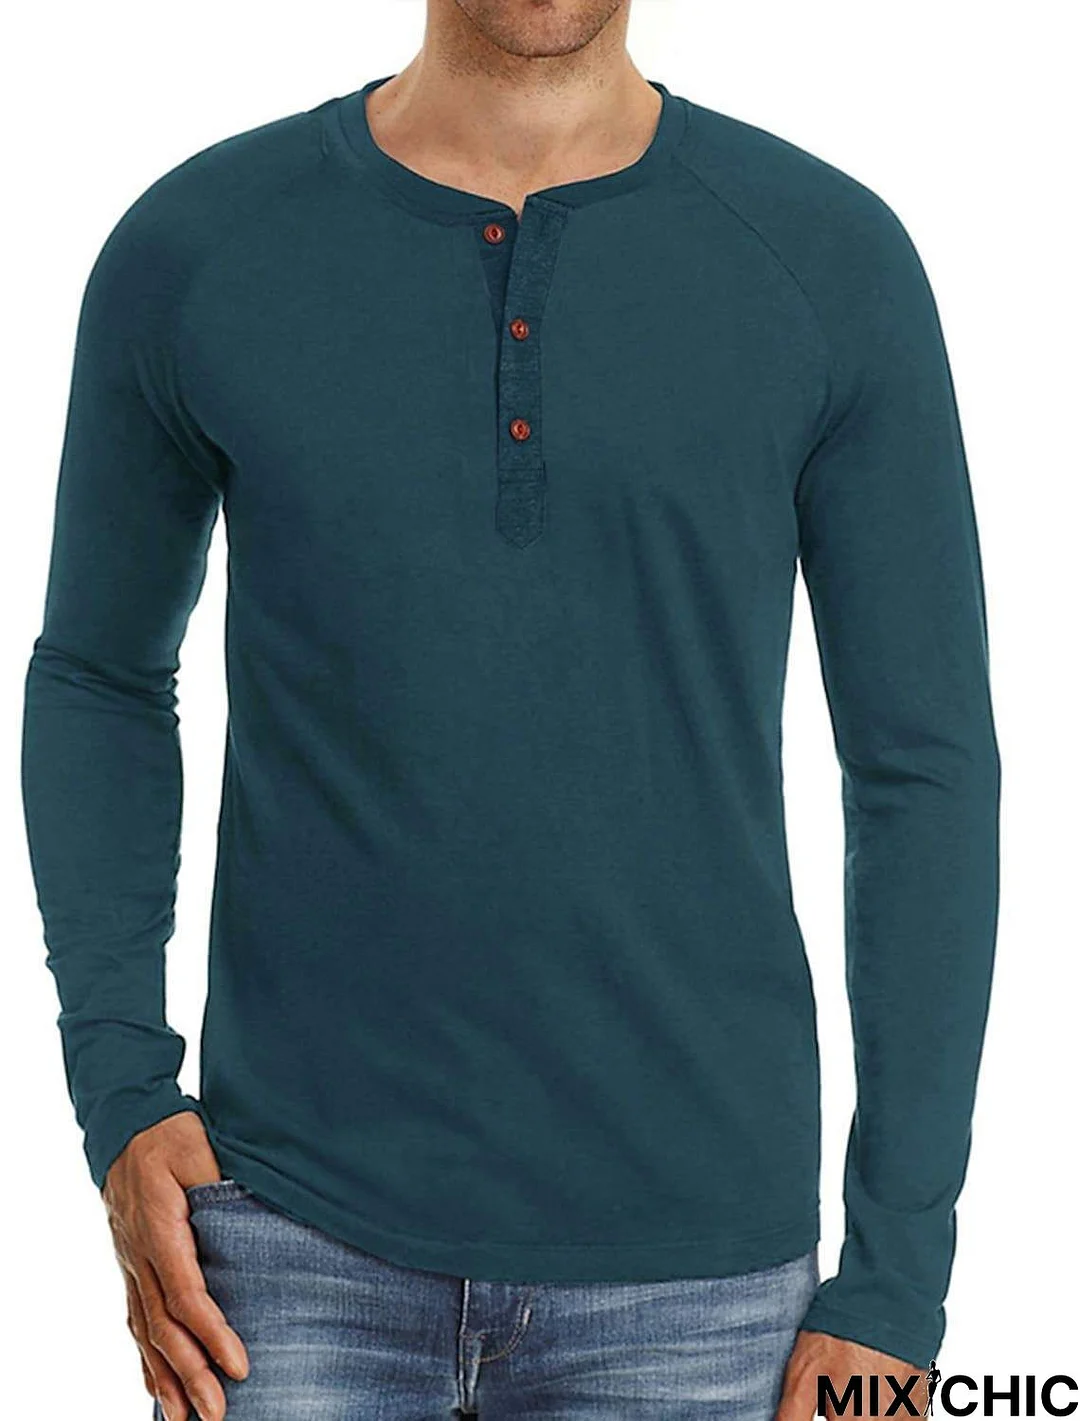 Men's Long Sleeve T-Shirt Solid Color Casual Top Basic Non-Printing Shirt Soft Touch Daily Wear